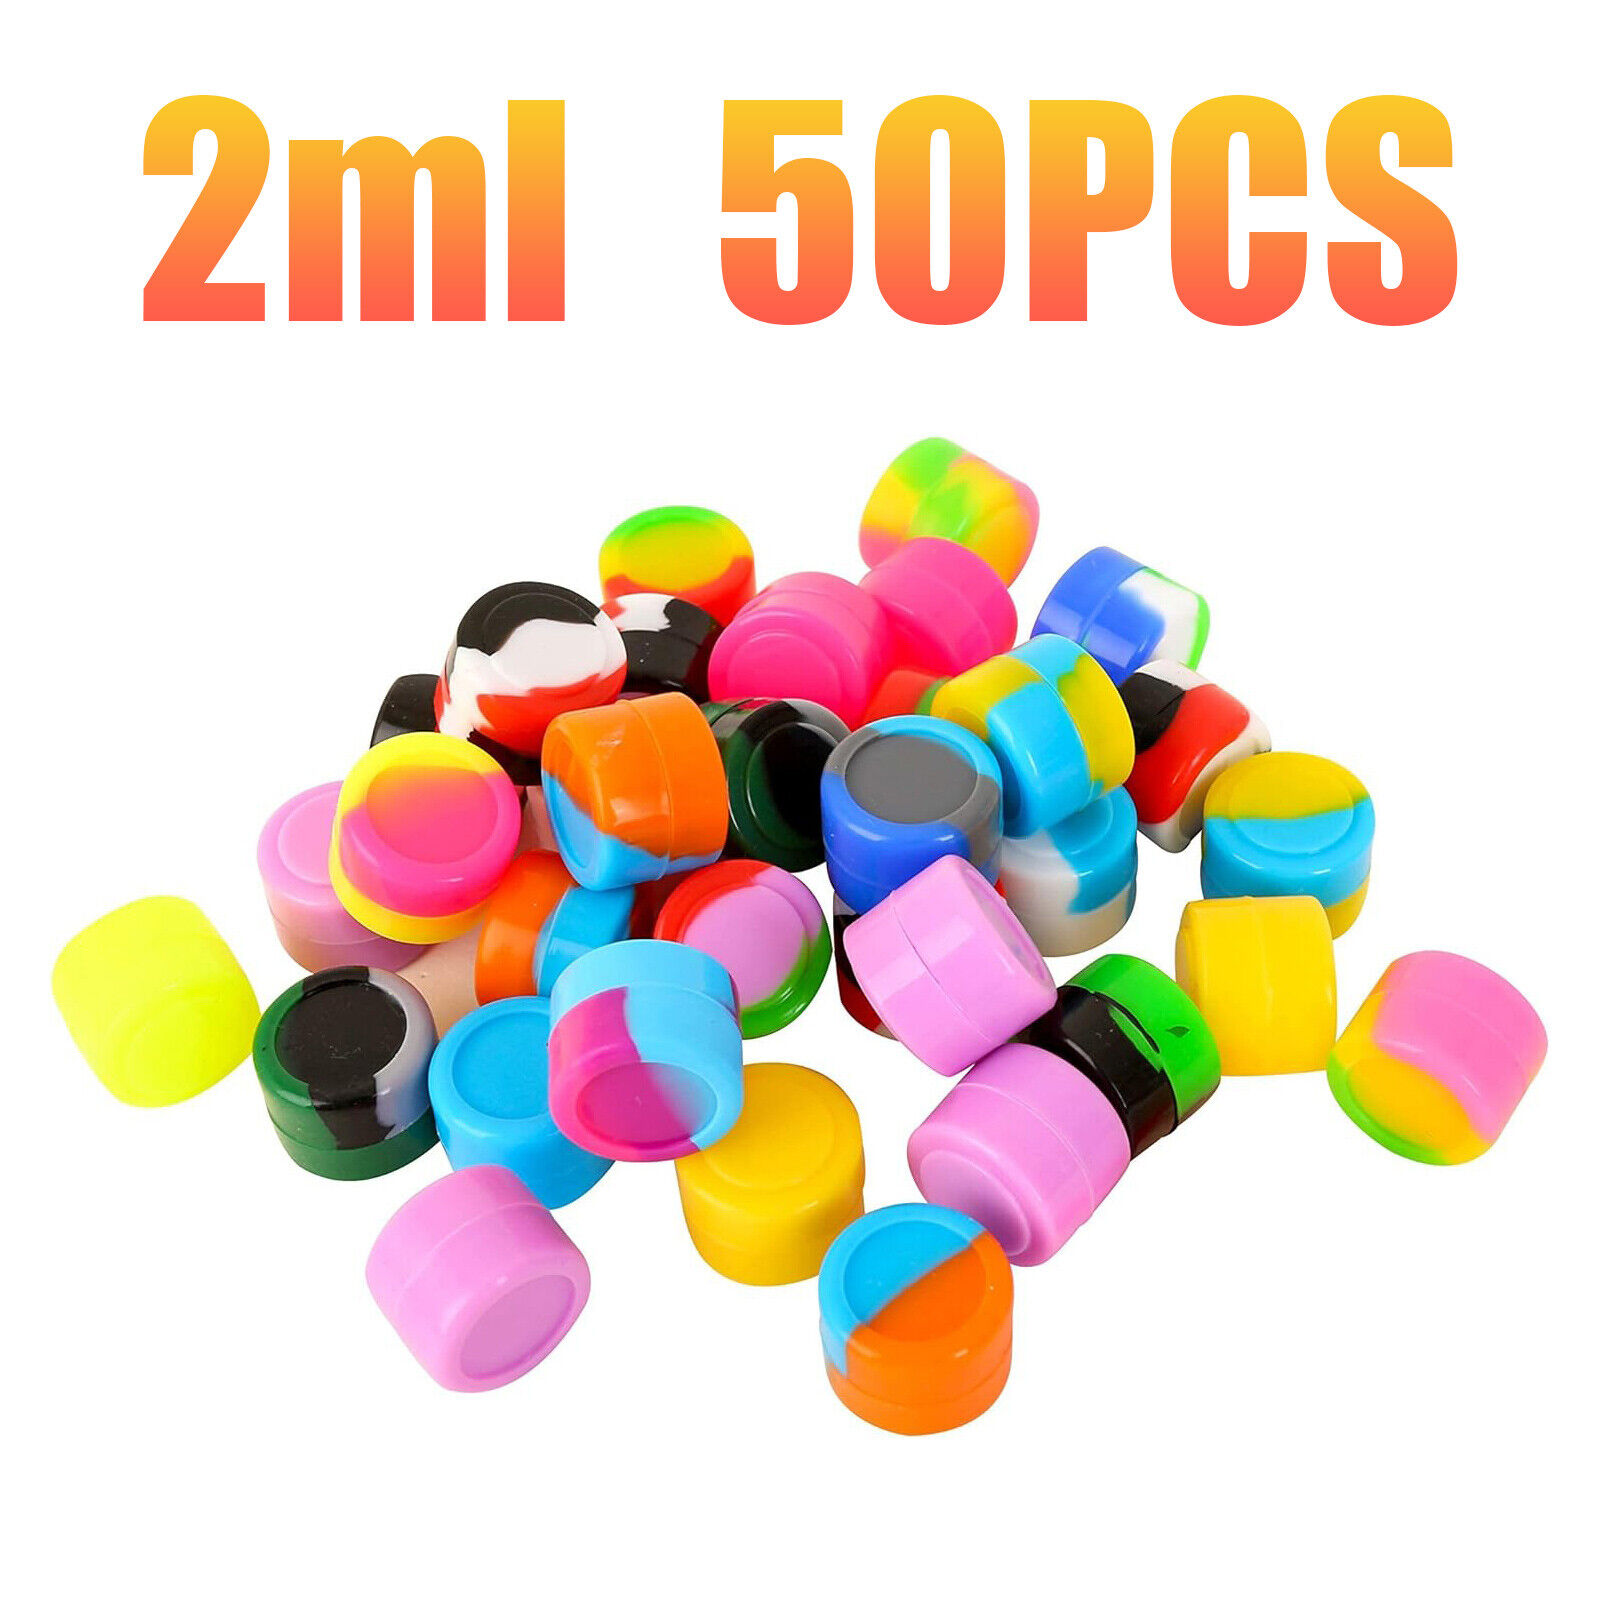 50pcs 2ml Silicone Container Jar Non-Stick Mixed colors Round Wholesale lot